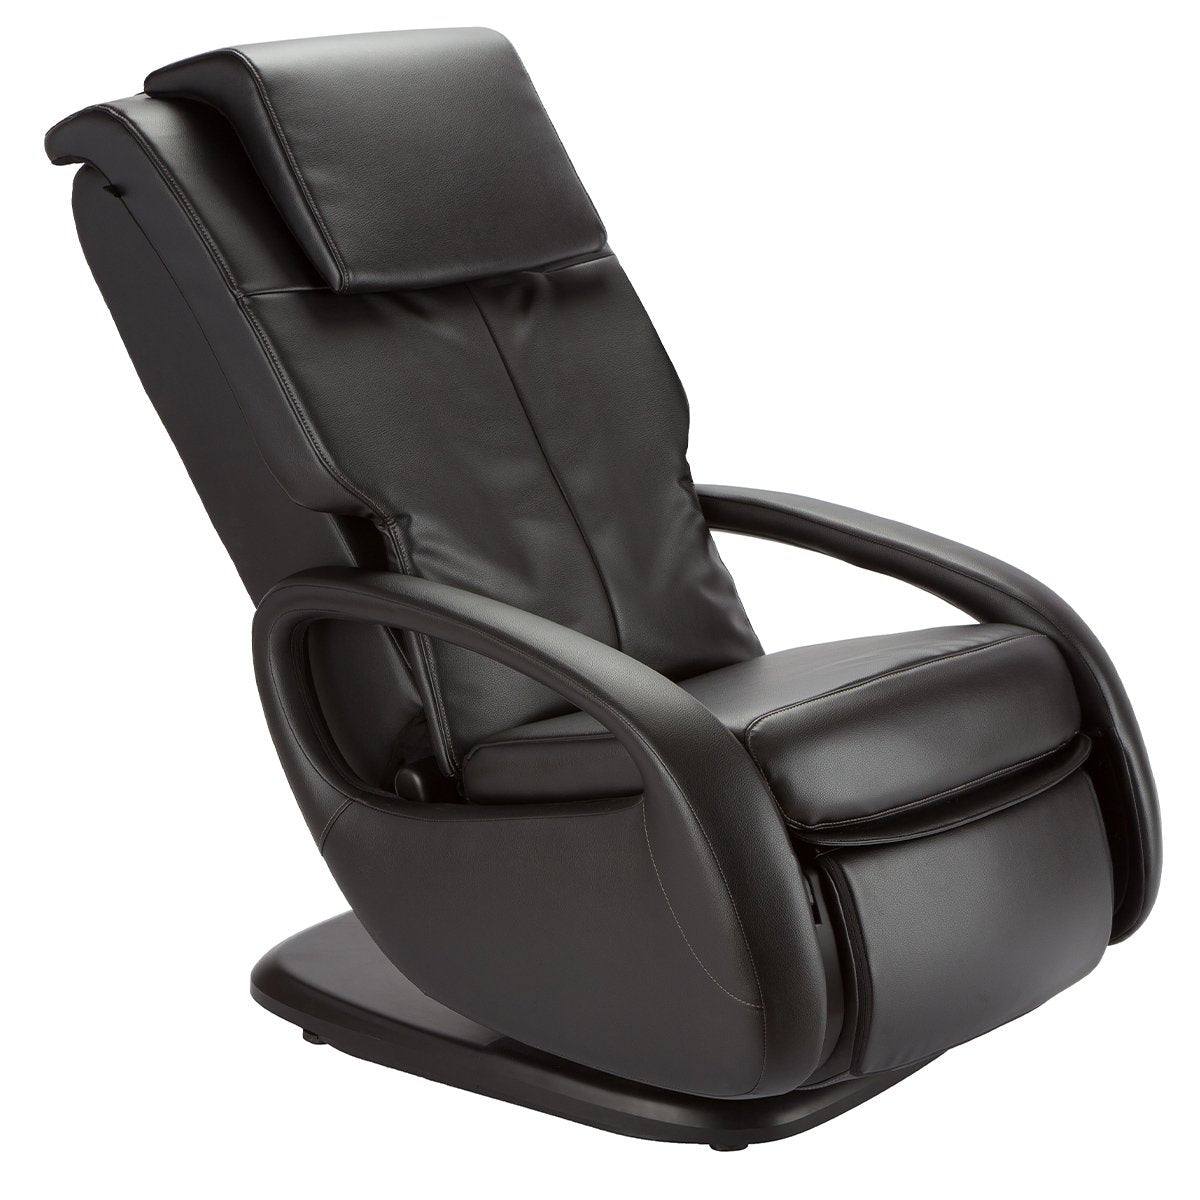 Massage Chairs Price $1999 and under